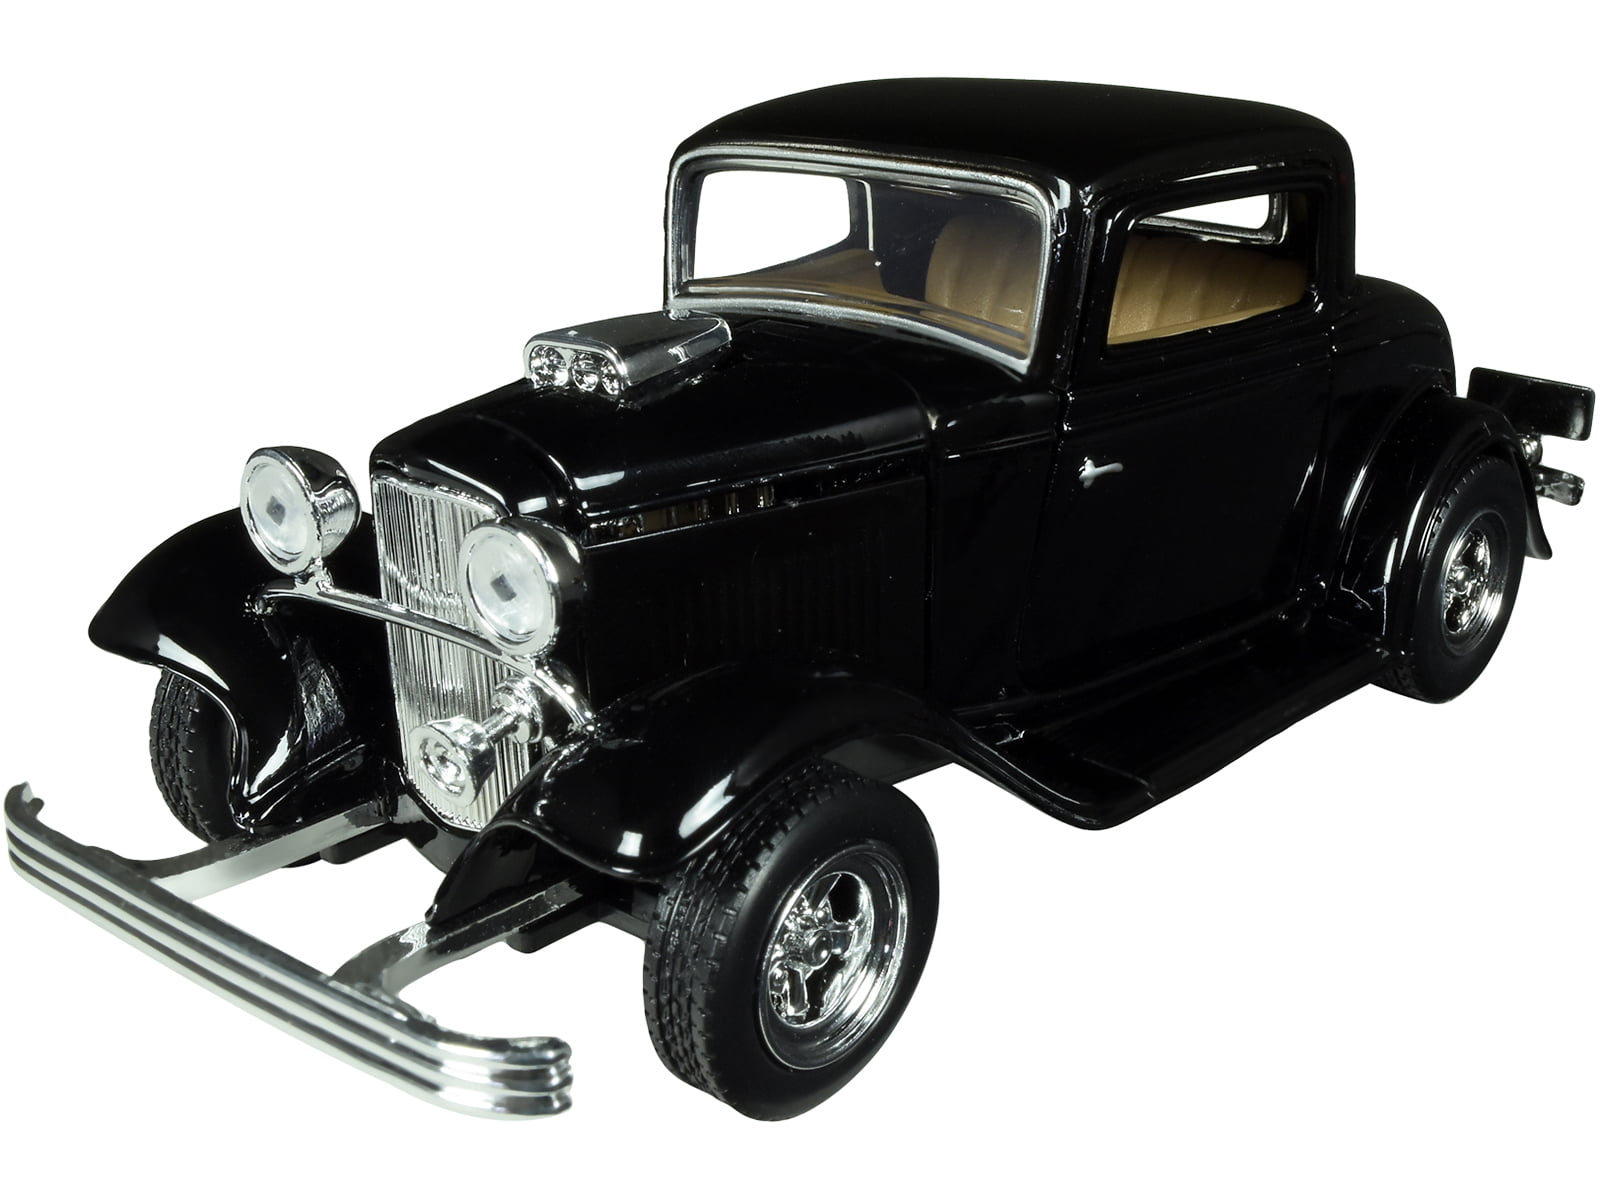 1932 FORD COUPE DIE CAST BLACK 1/24 BY MOTOR MAX PREMIUM COLLECTION 